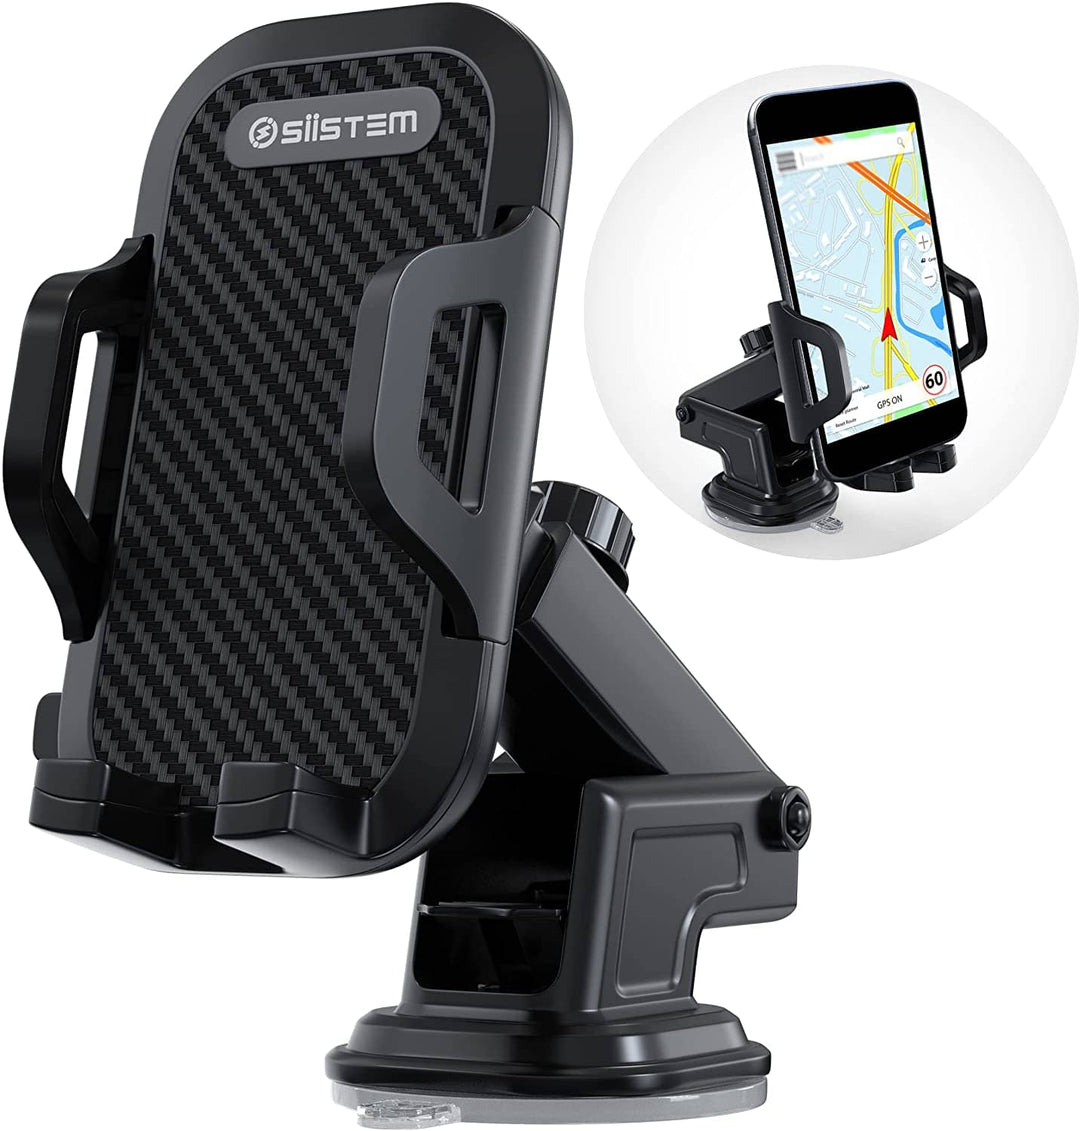 Bnimtm Car Phone Holder 4 in 1 Universal Phone Mount Cradle Super Stable  for Car Dashboard/Windscreen/Air Vent, One Button Release and 360° Rotation